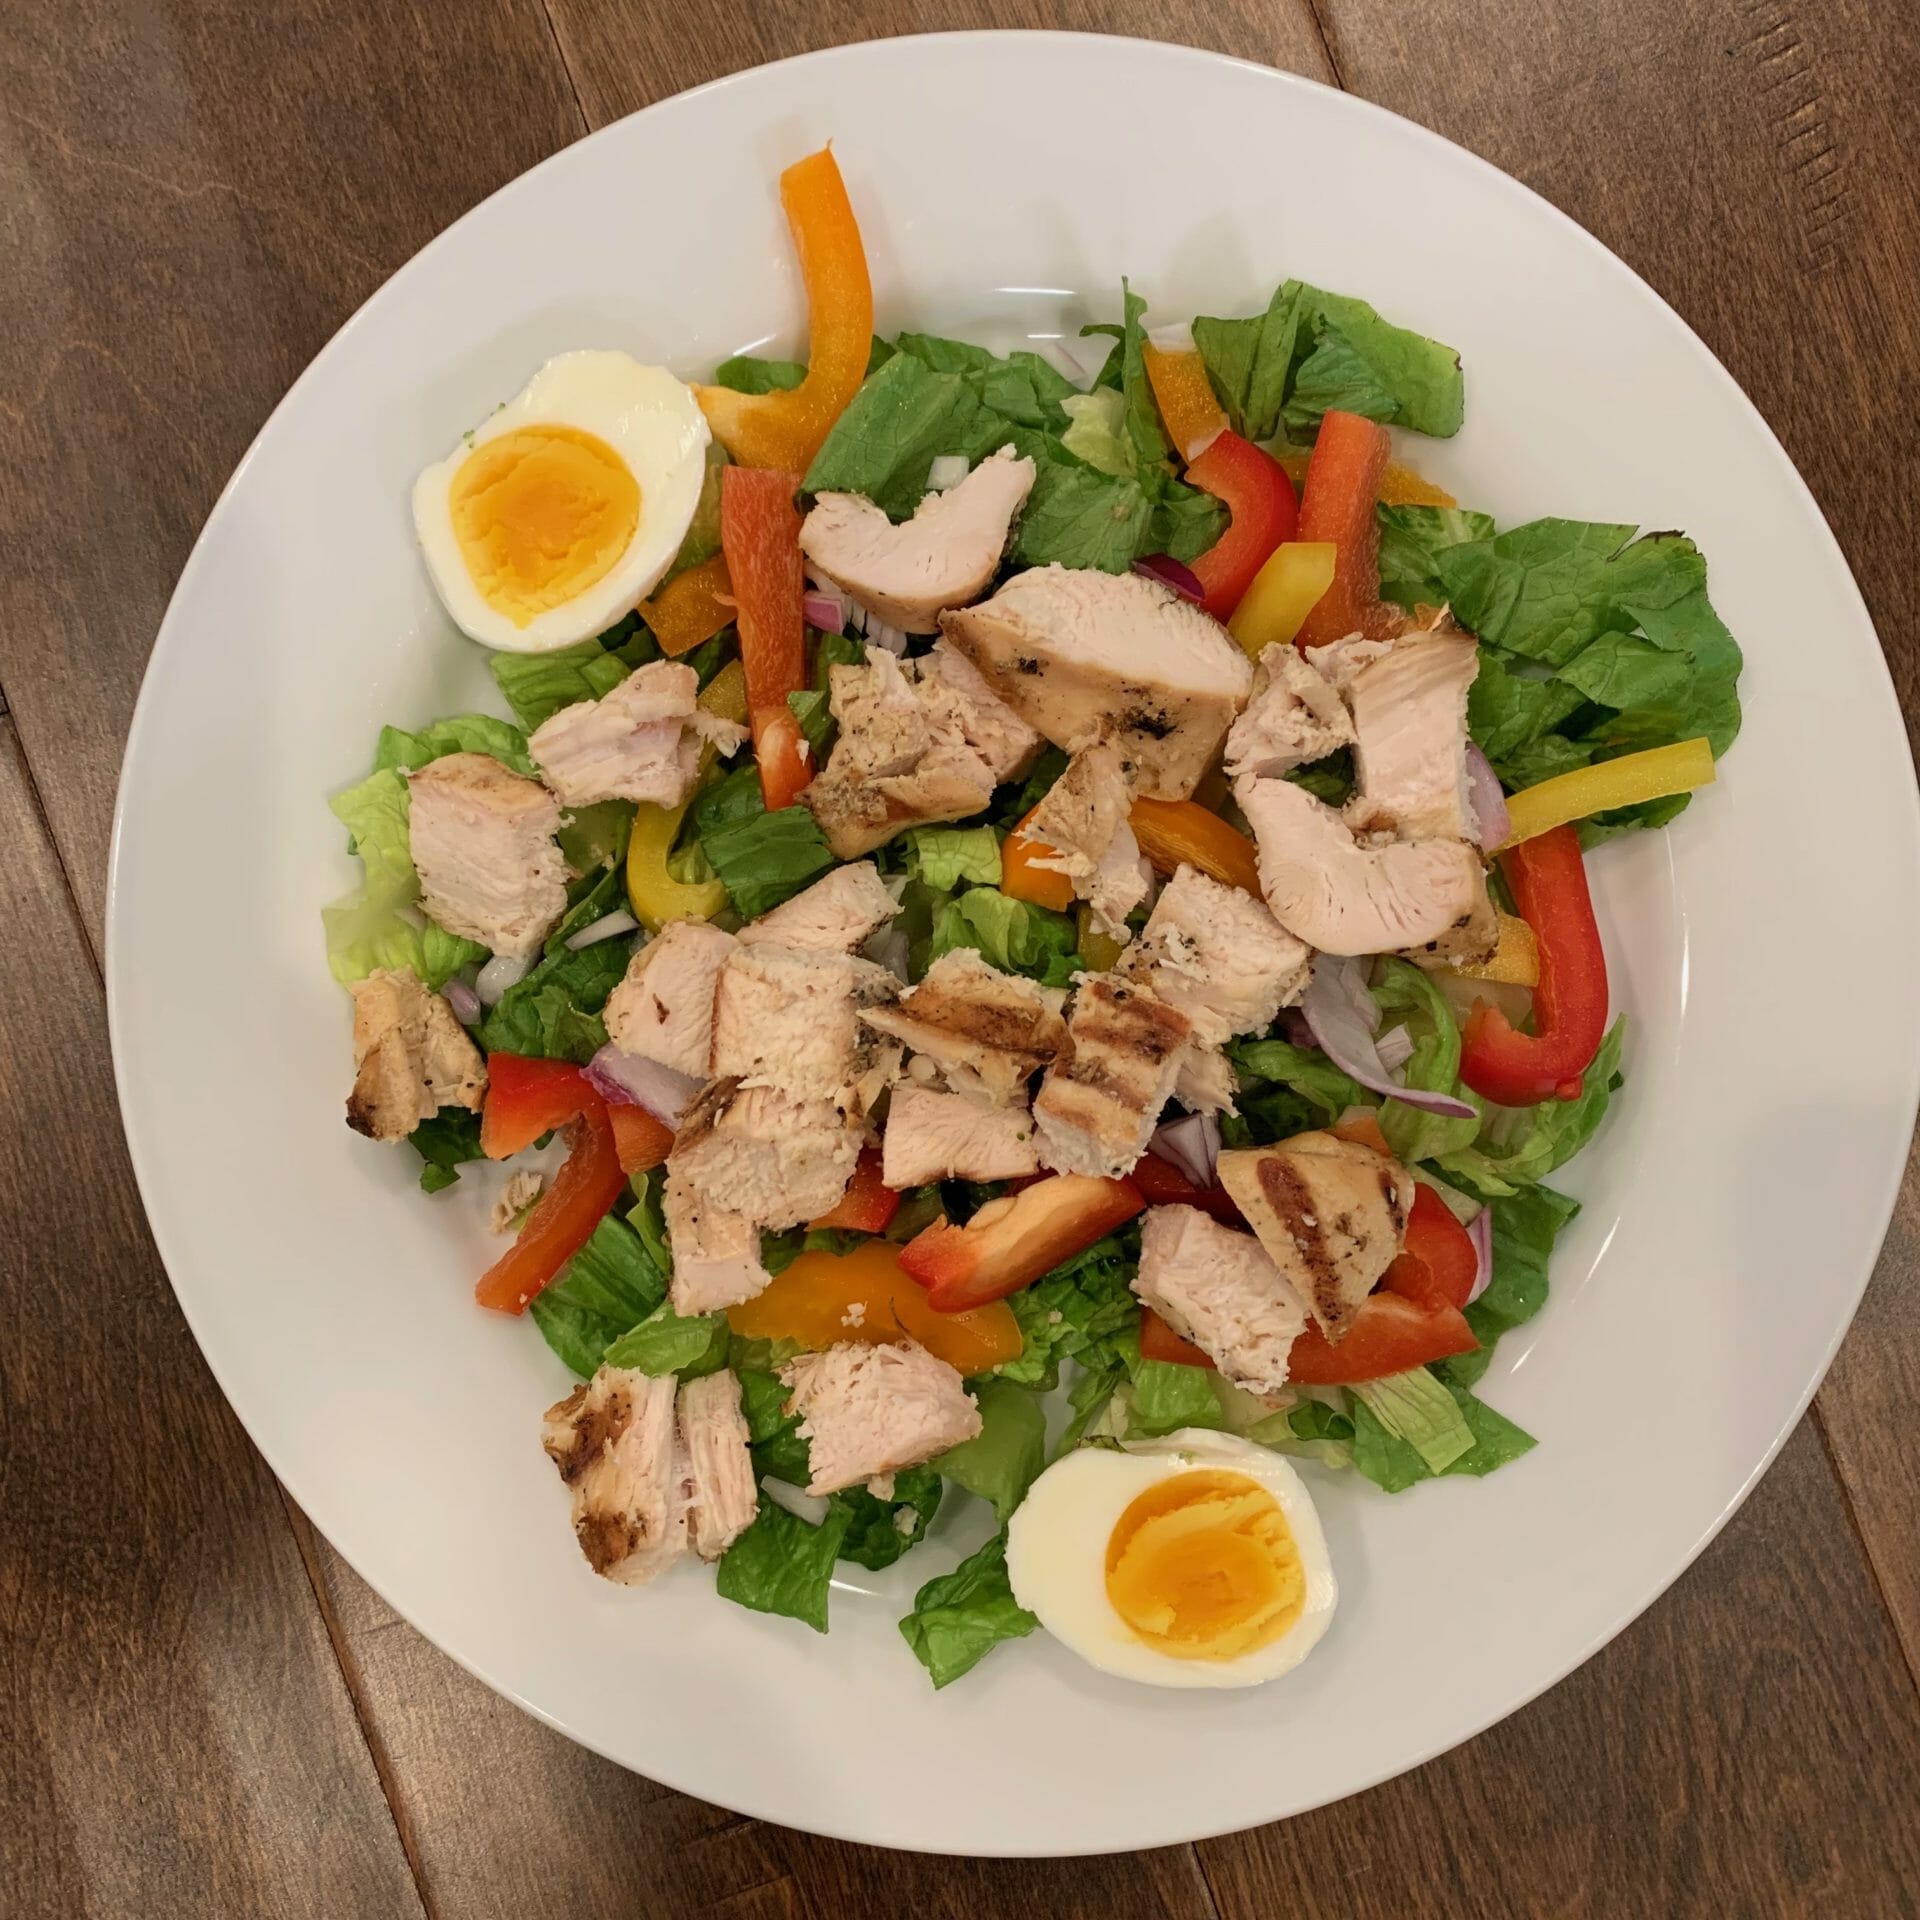 Salad with chunks of grilled chicken, lettuce, boiled eggs, peppers and onions